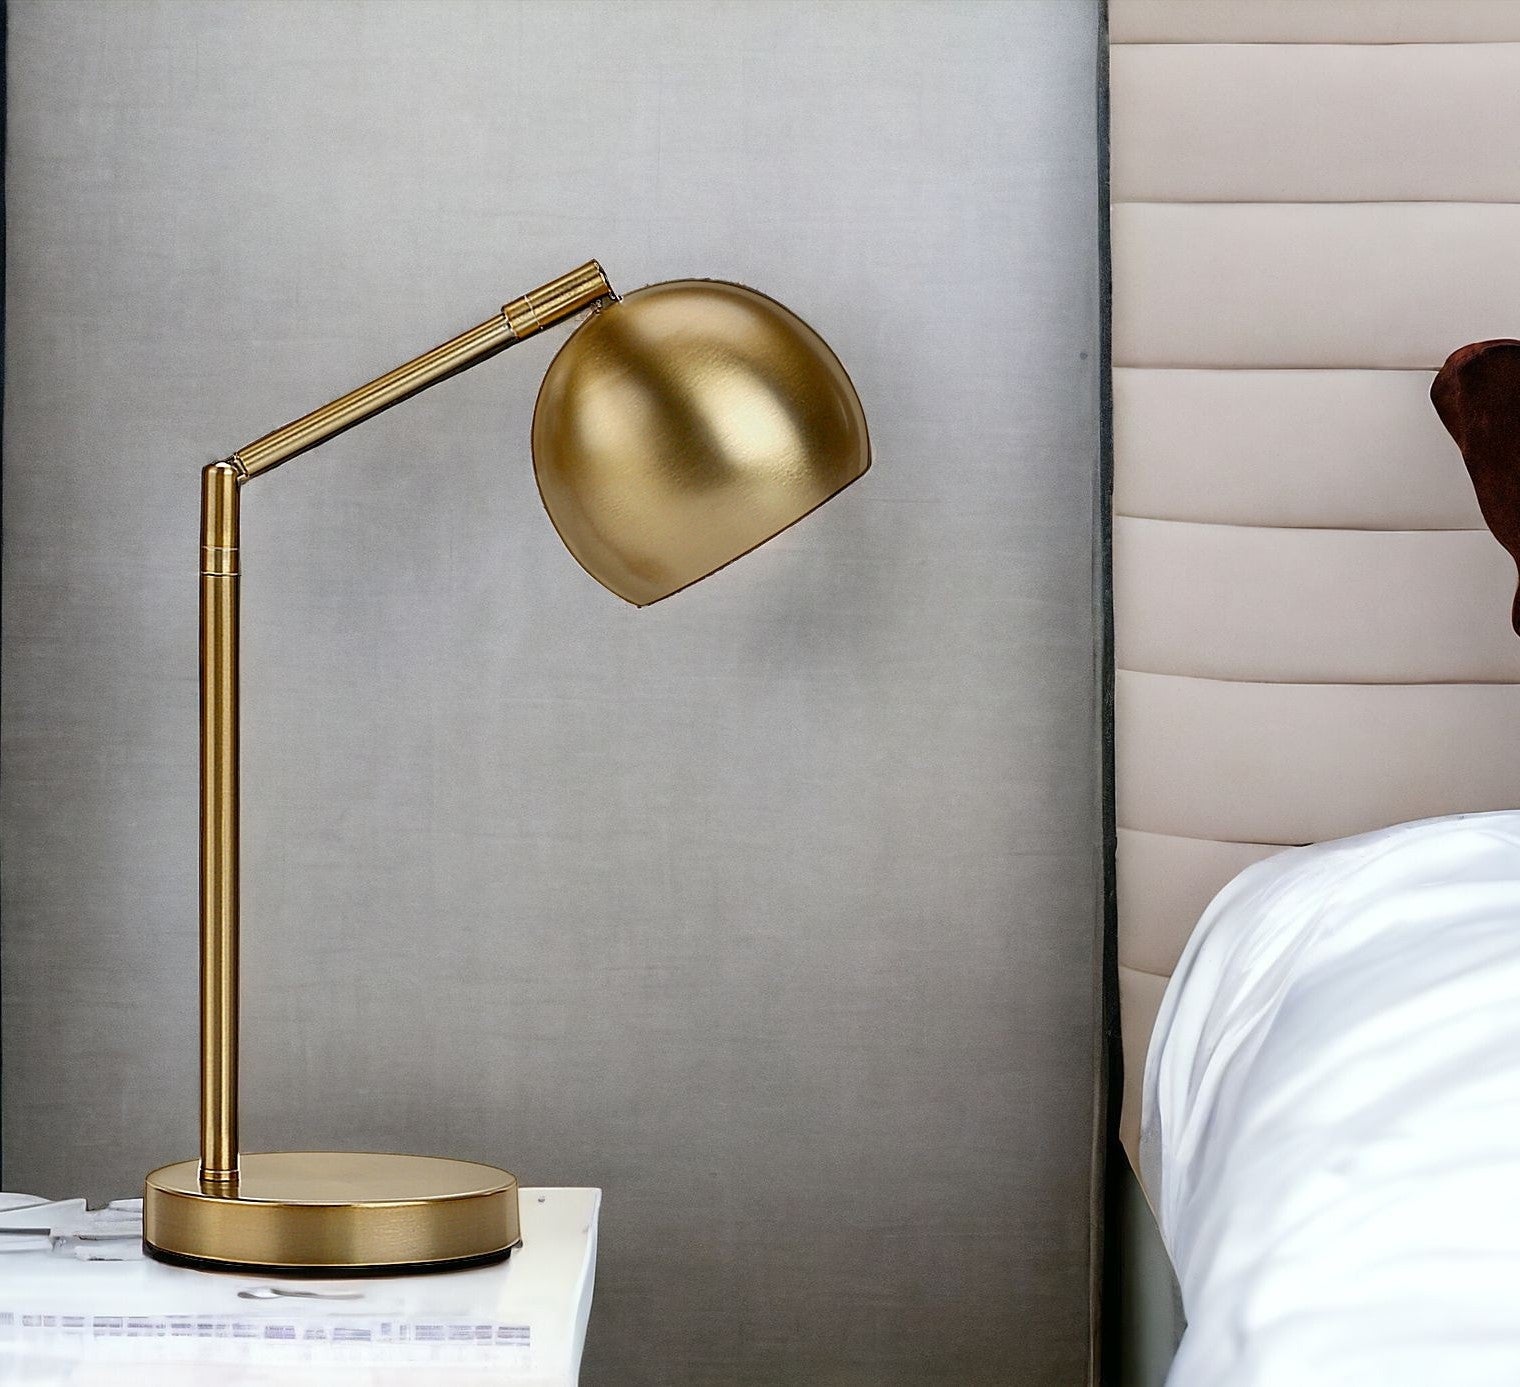 19" Gold Metal Round Table Lamp With Gold Dome Shade